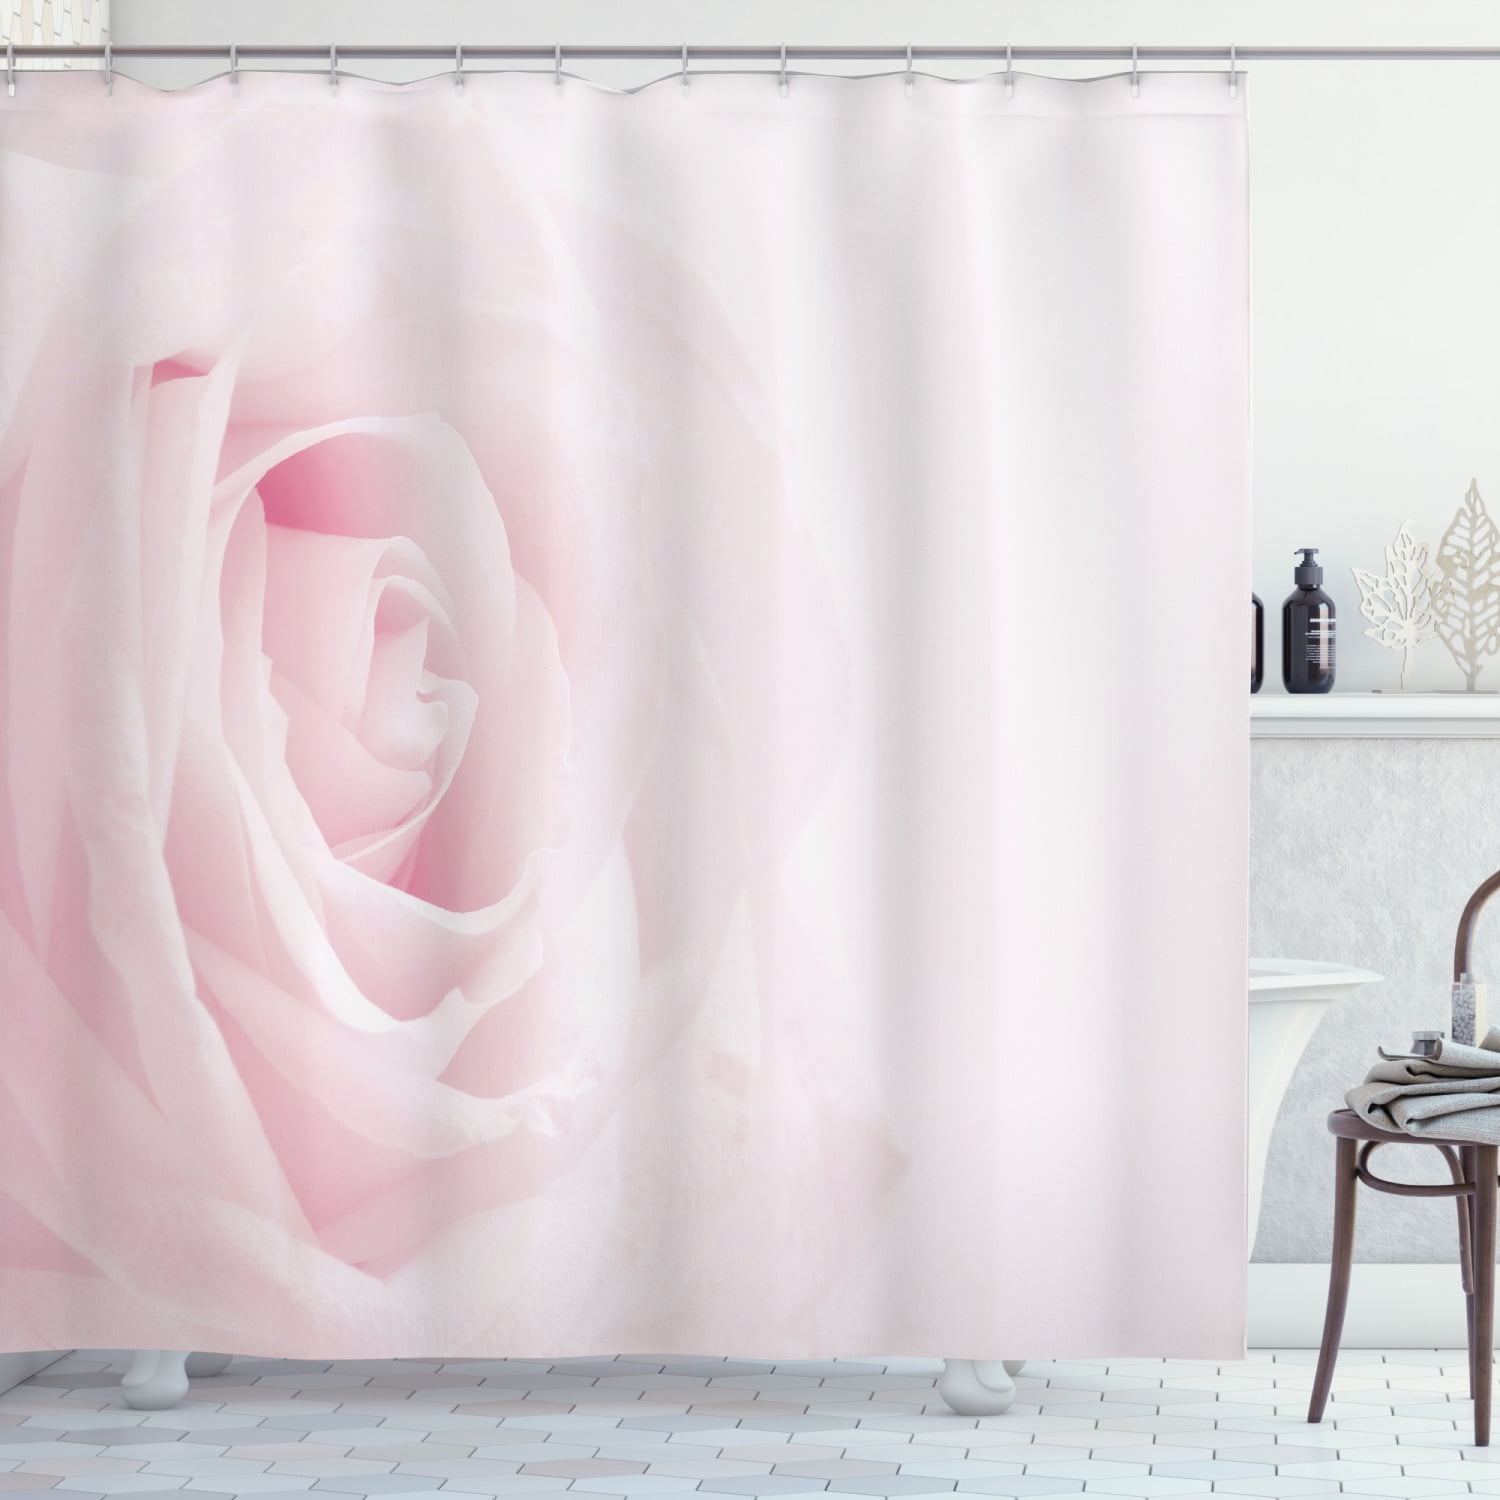 Rose Flower Floral Extra Long Art Shower Curtain Waterproof Polyester Fabric